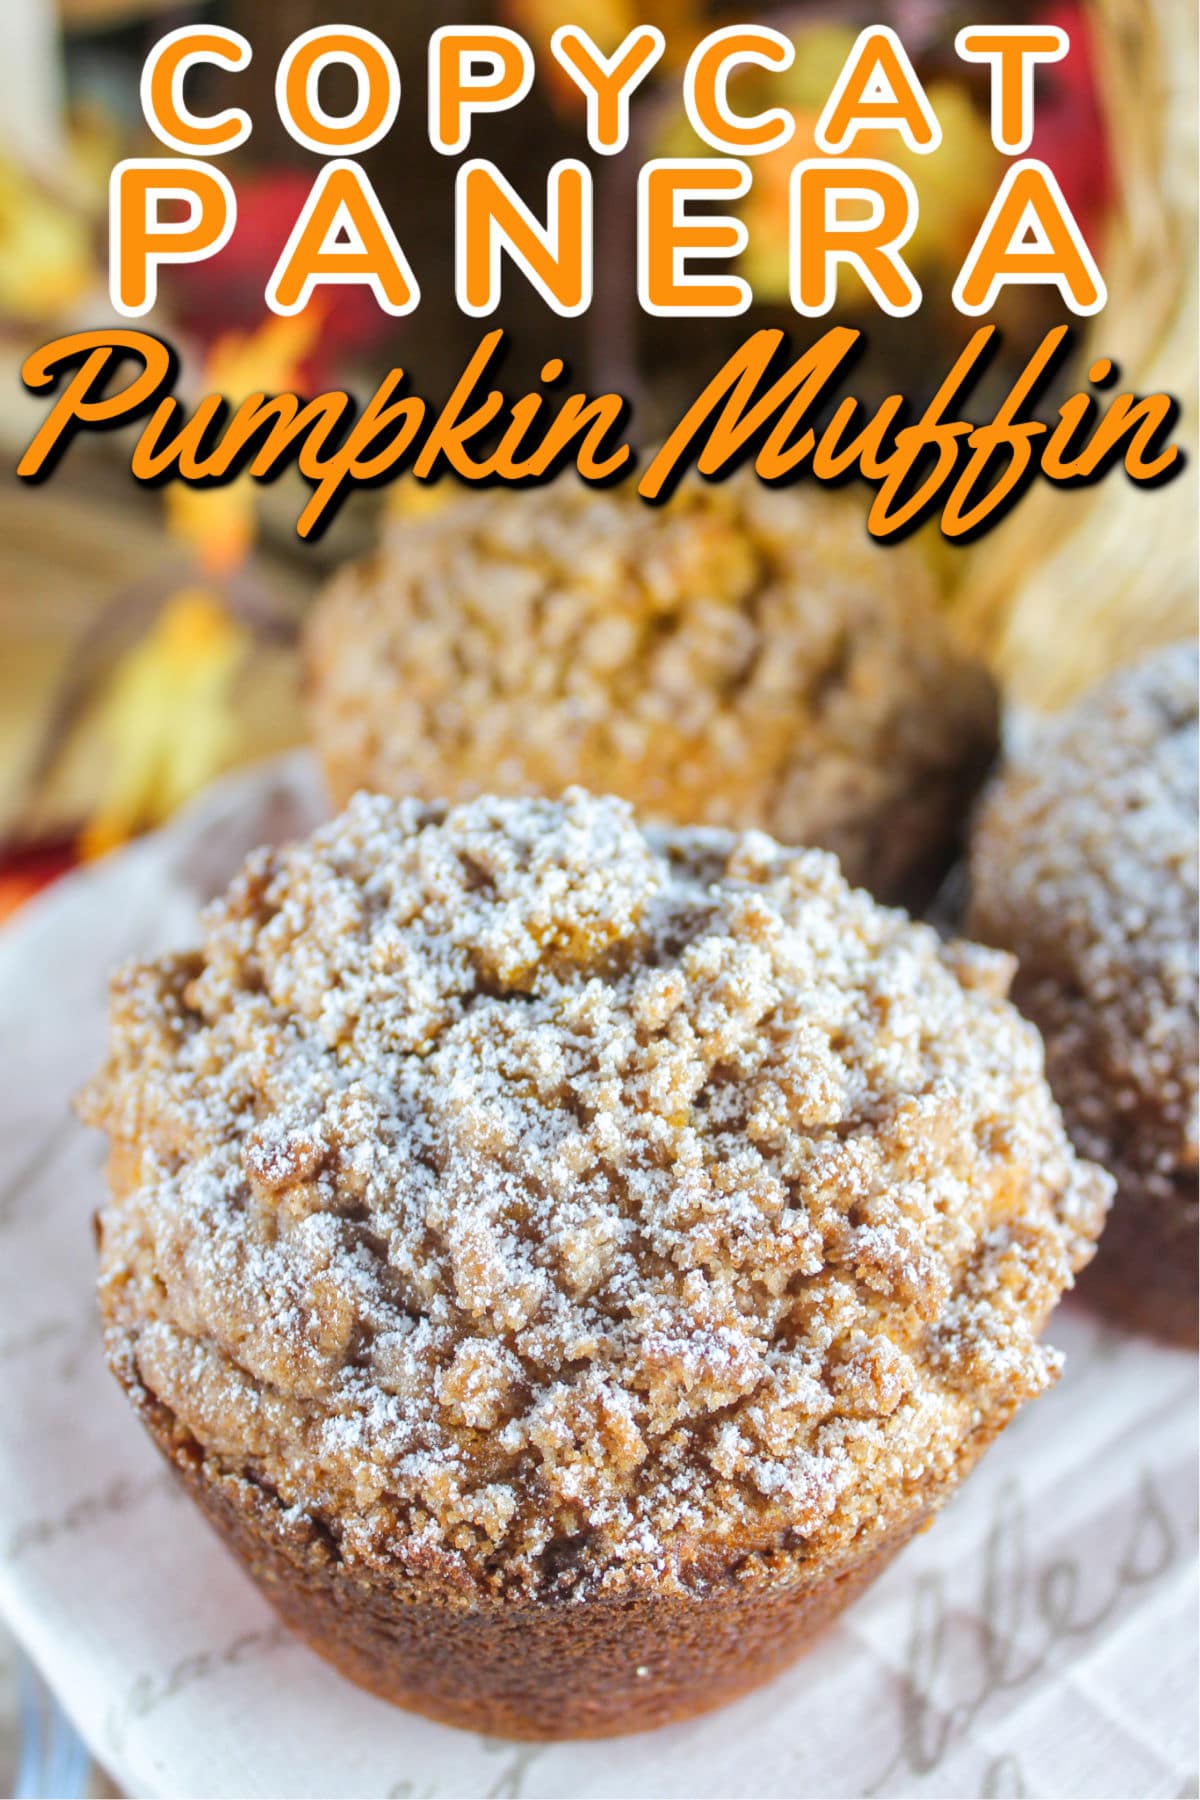 These Copycat Panera Pumpkin Muffins will have you ordering pumpkin spice lattes like a Basic B in 5 seconds flat! They're a delicious balance of pumpkin spice and comforting muffin with an aroma that will fill your home!  via @foodhussy